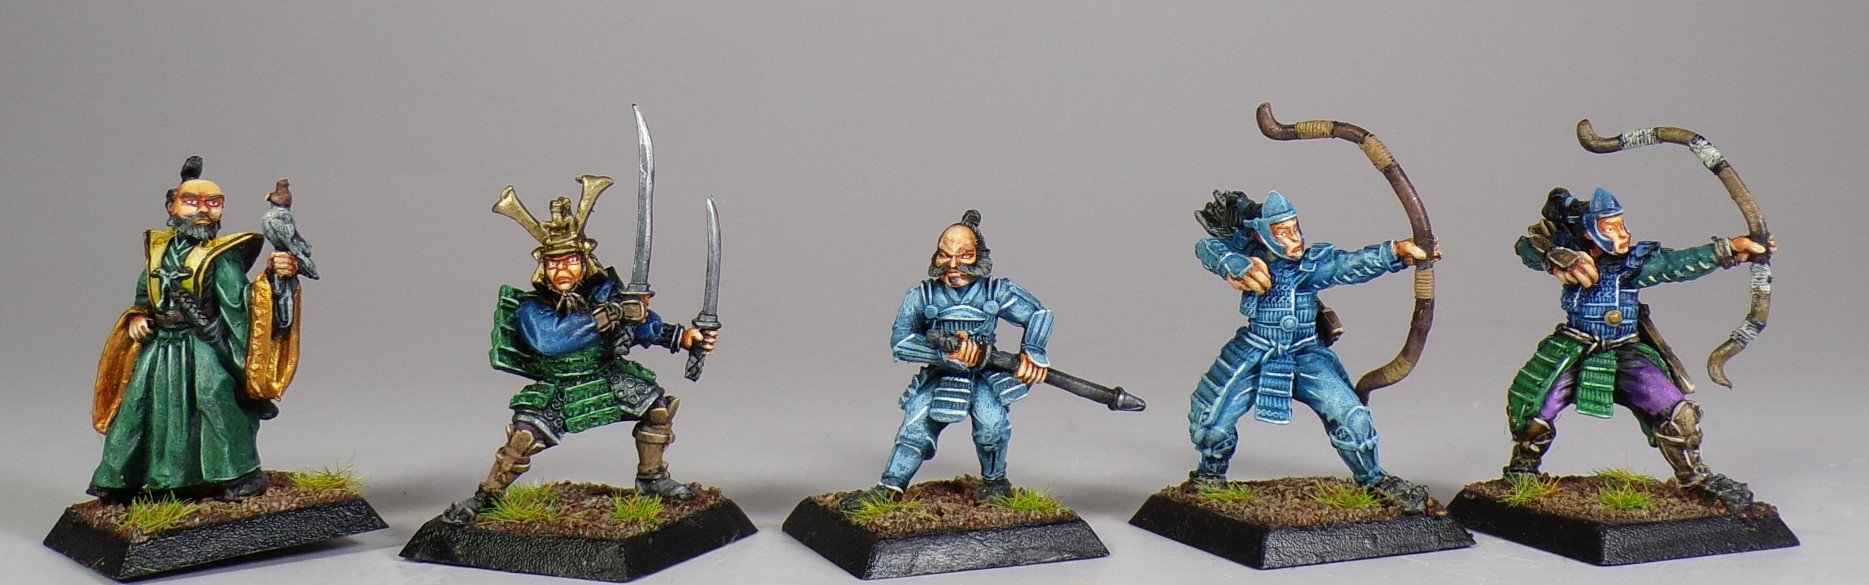 L5R Legend of the Five Rings Miniature Painting Service Paintedfigs (70).jpg